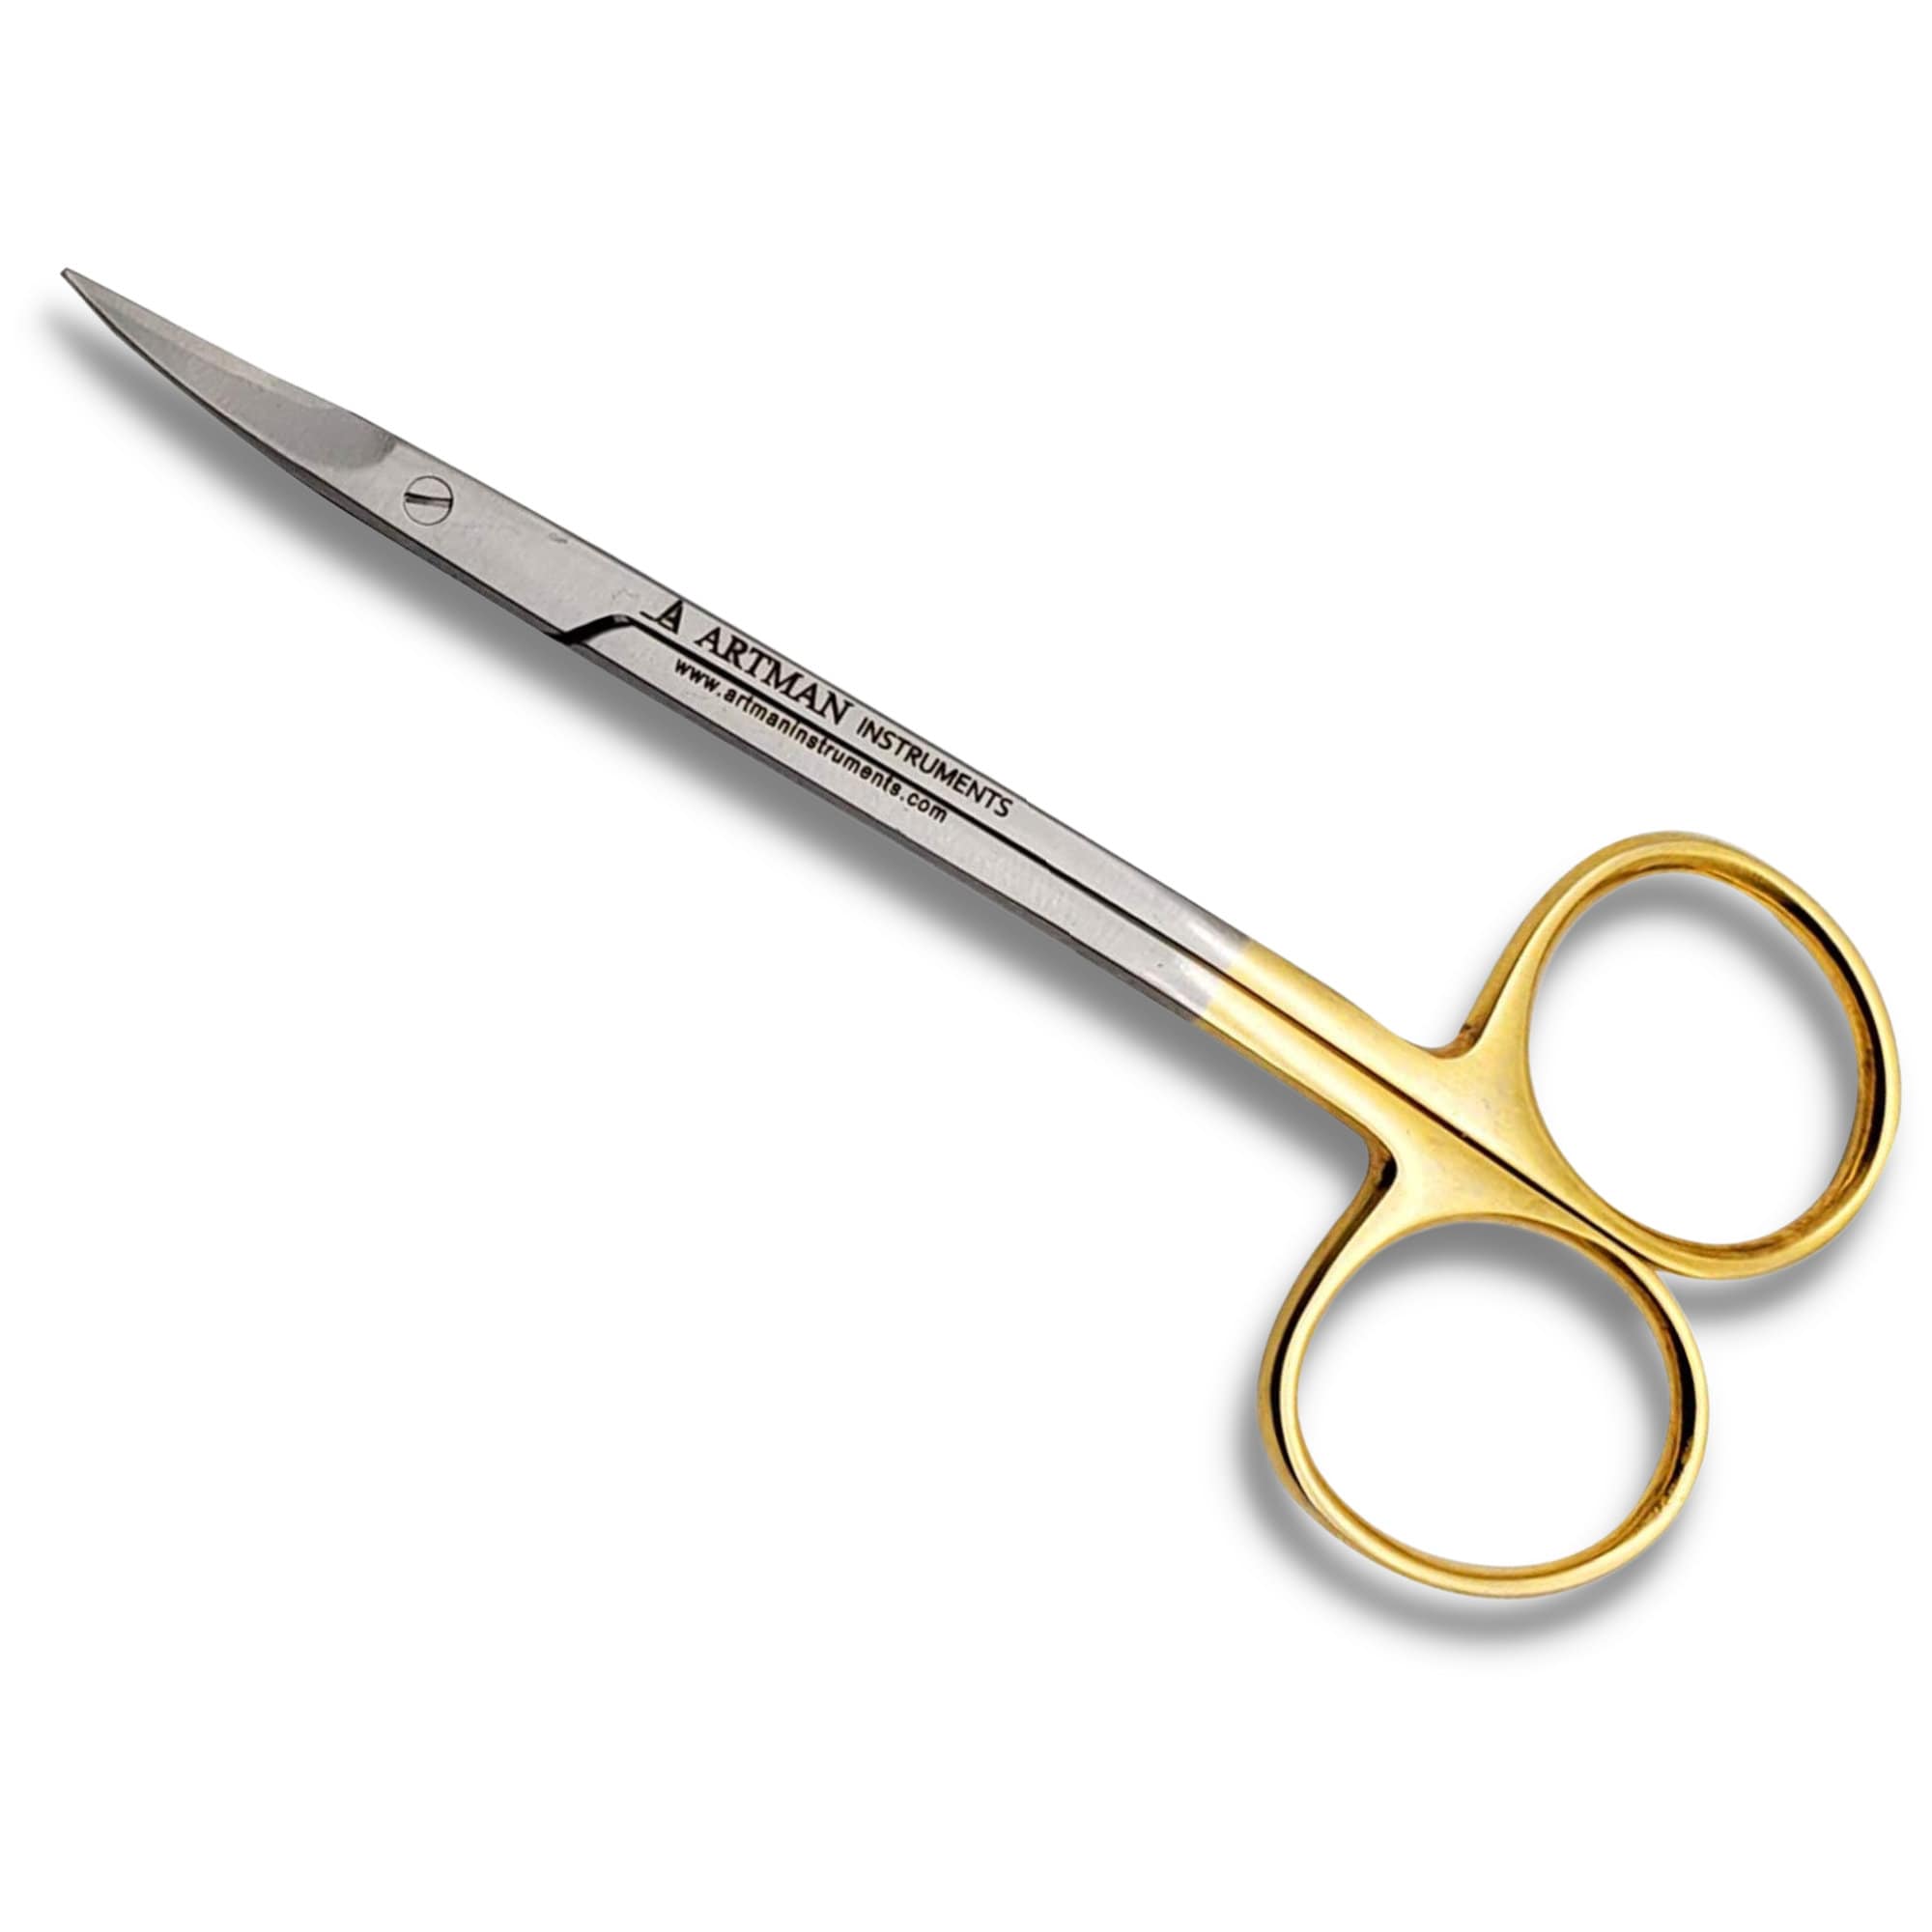 Micro Scissors 4.5 Curved Castroviejo Stitch Cutting Embroidery Spring  Action Extra Sharp Squeeze Scissors ARTMAN 